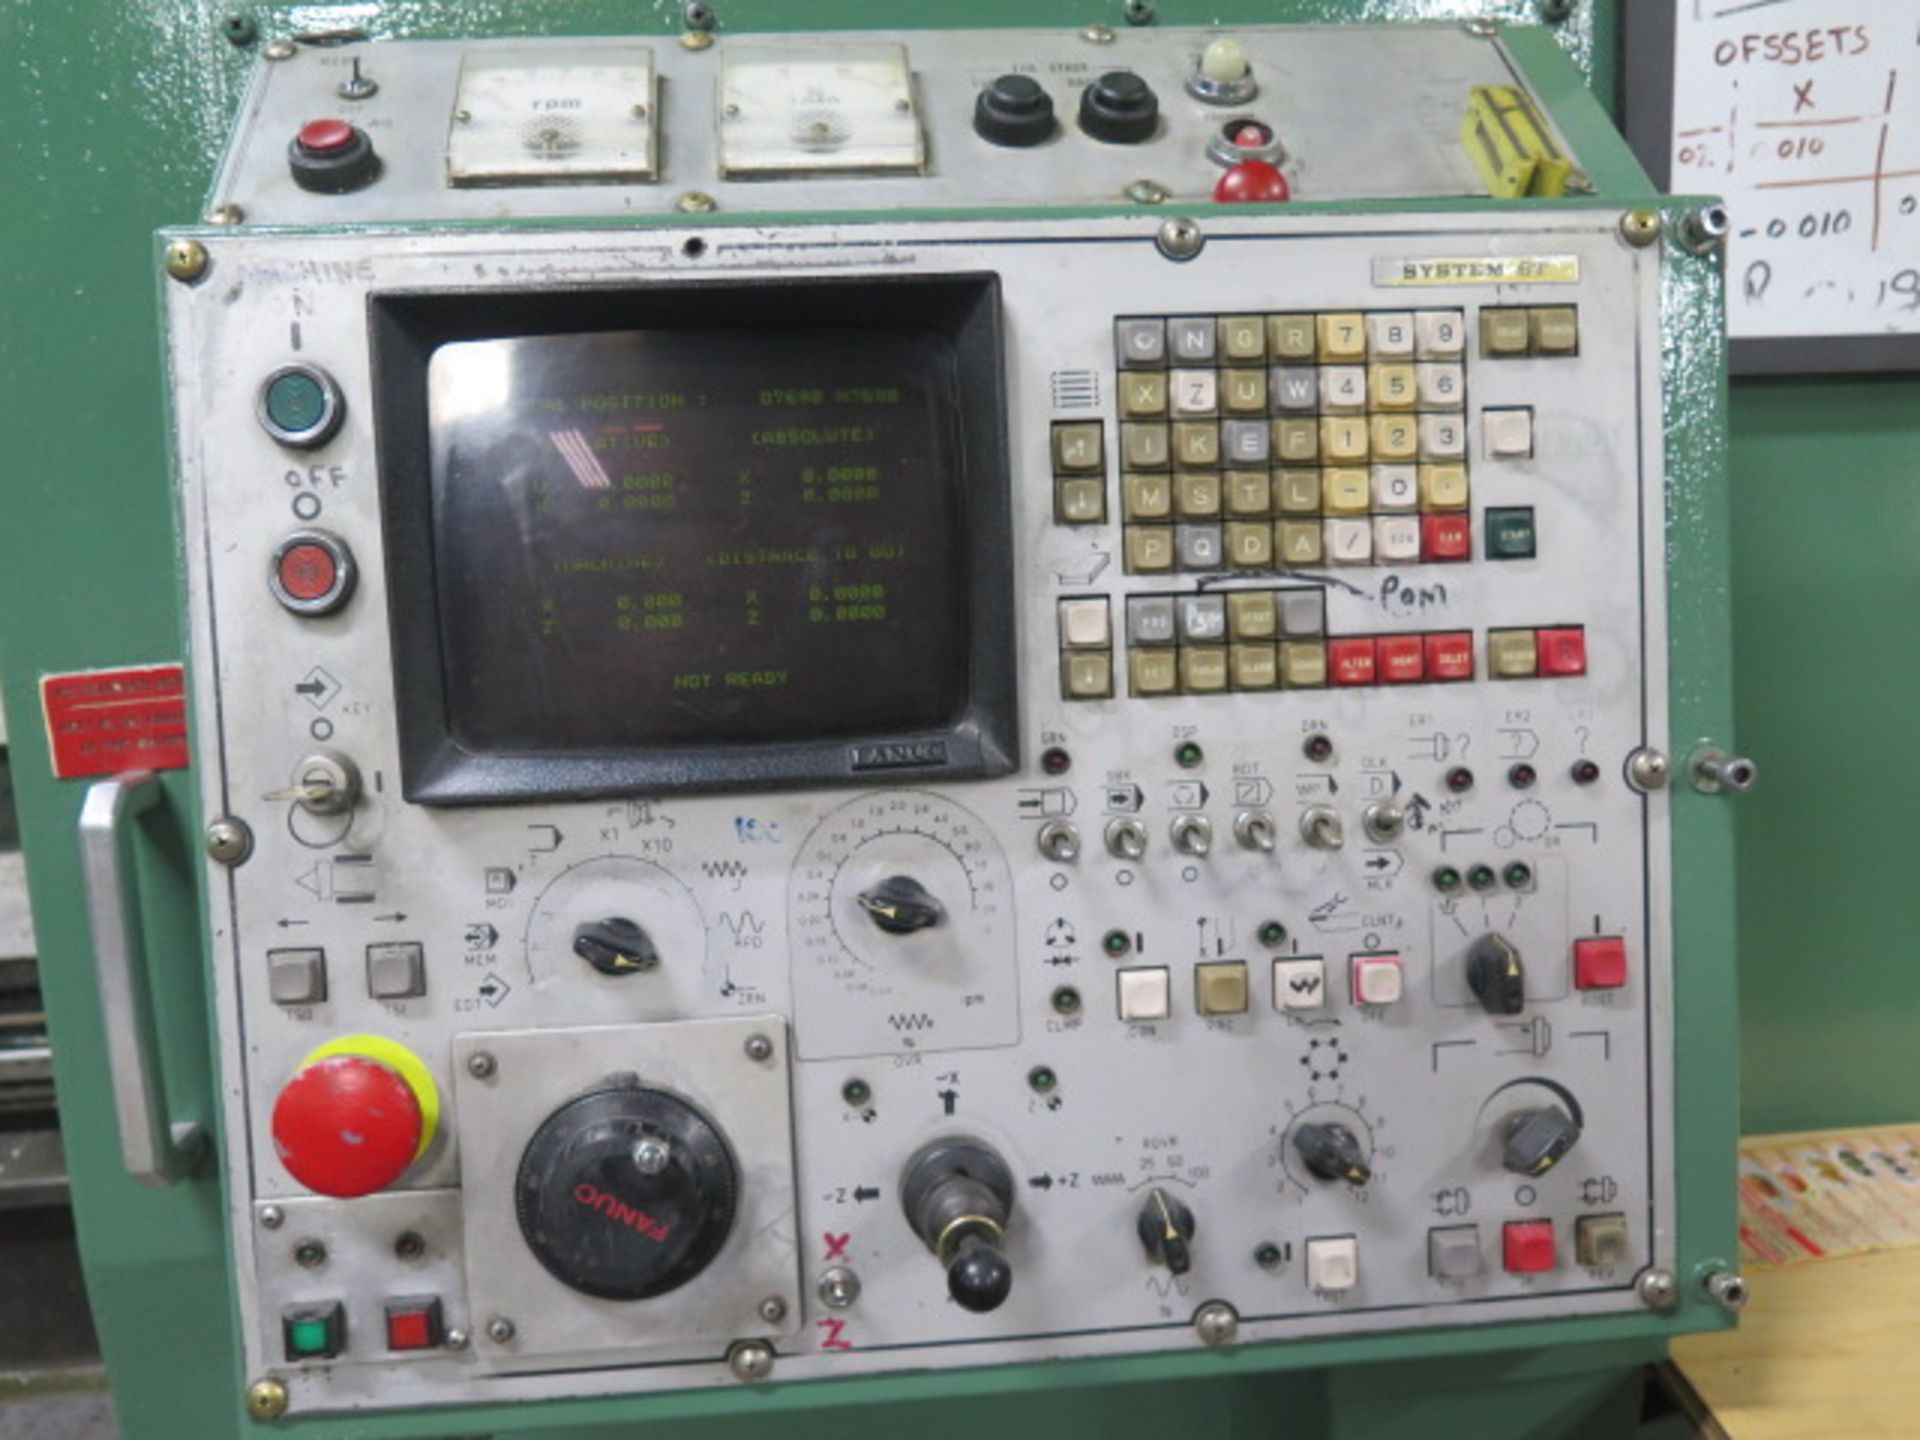 Mori Seiki SL-7C CNC Turning Center s/n 2300 w/ Fanuc System 6T Controls, 12-St Turret, SOLD AS IS - Image 13 of 20